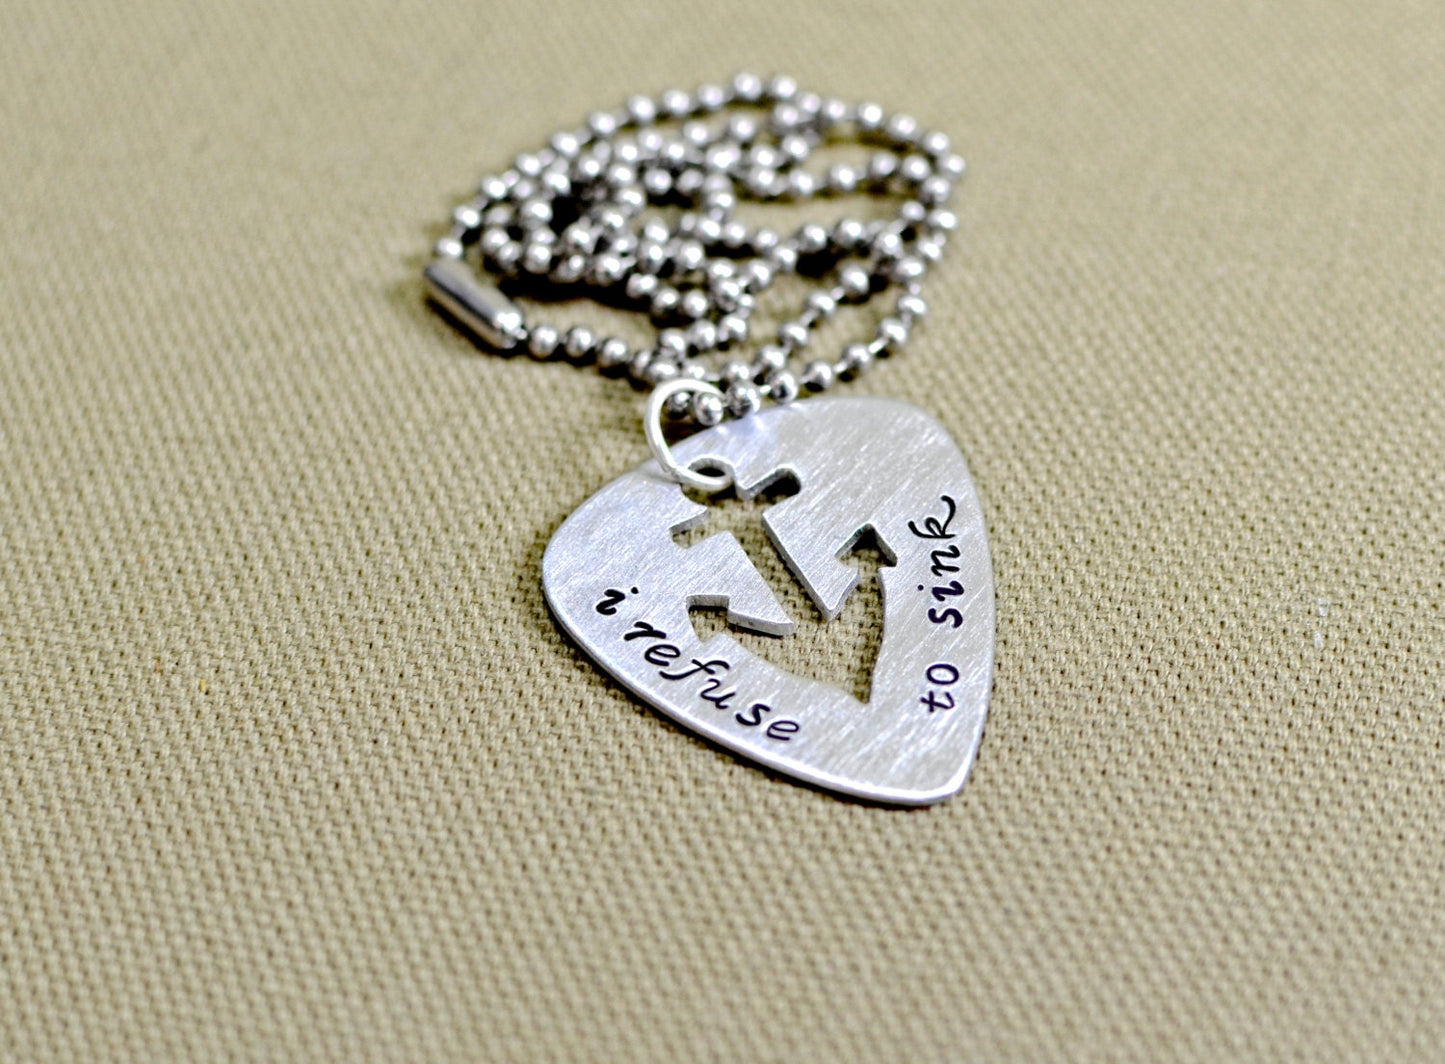 Refuse to sink guitar pick necklace with anchor design